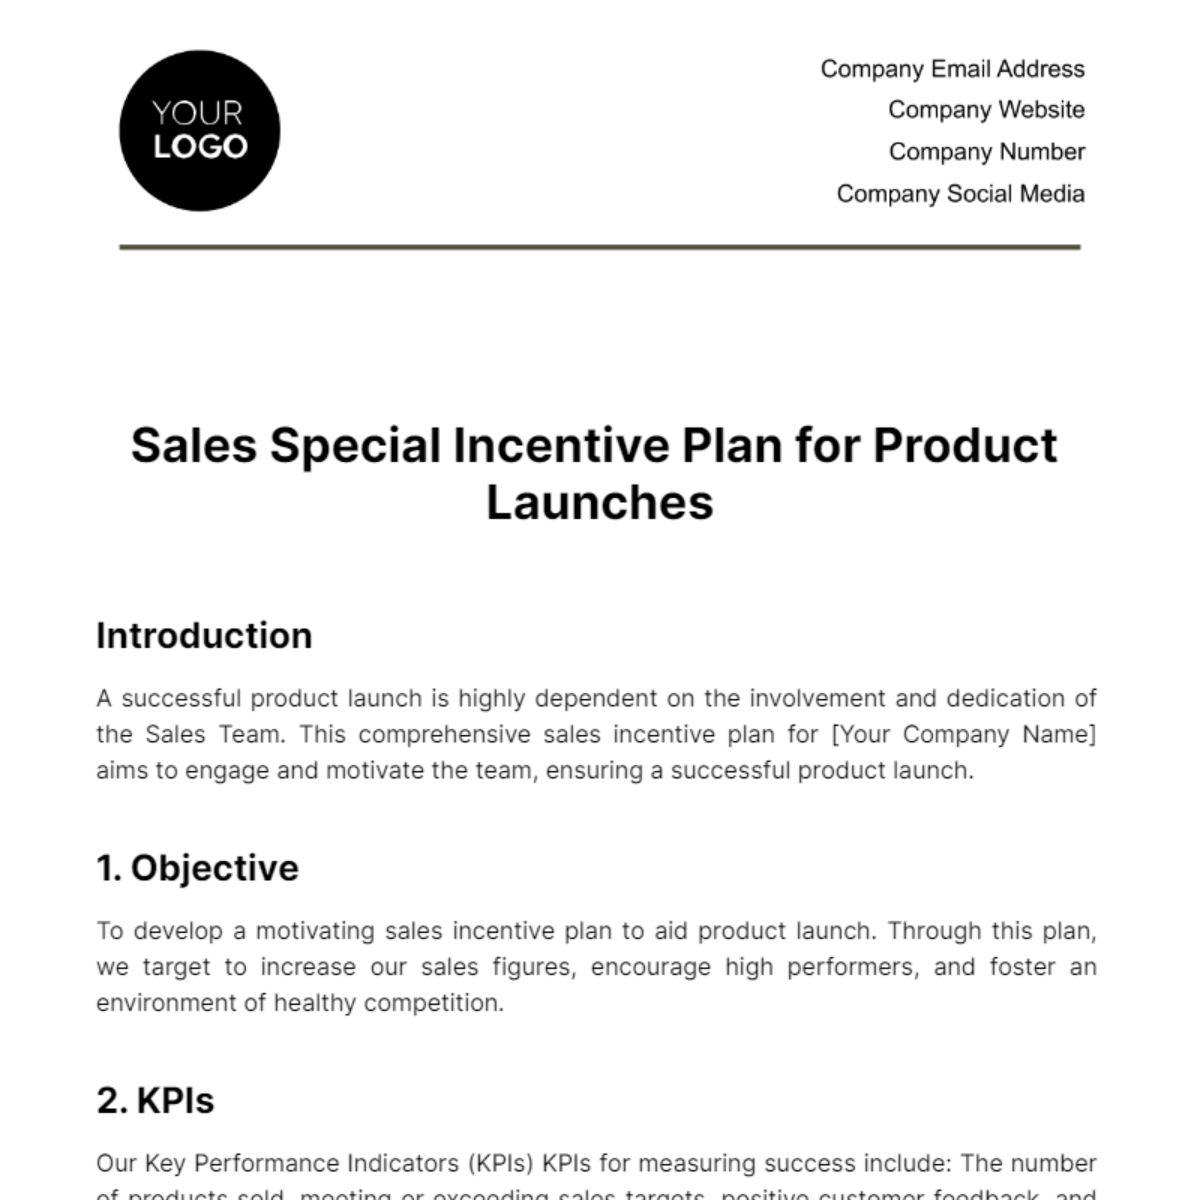 Free Sales Special Incentive Plan for Product Launches Template